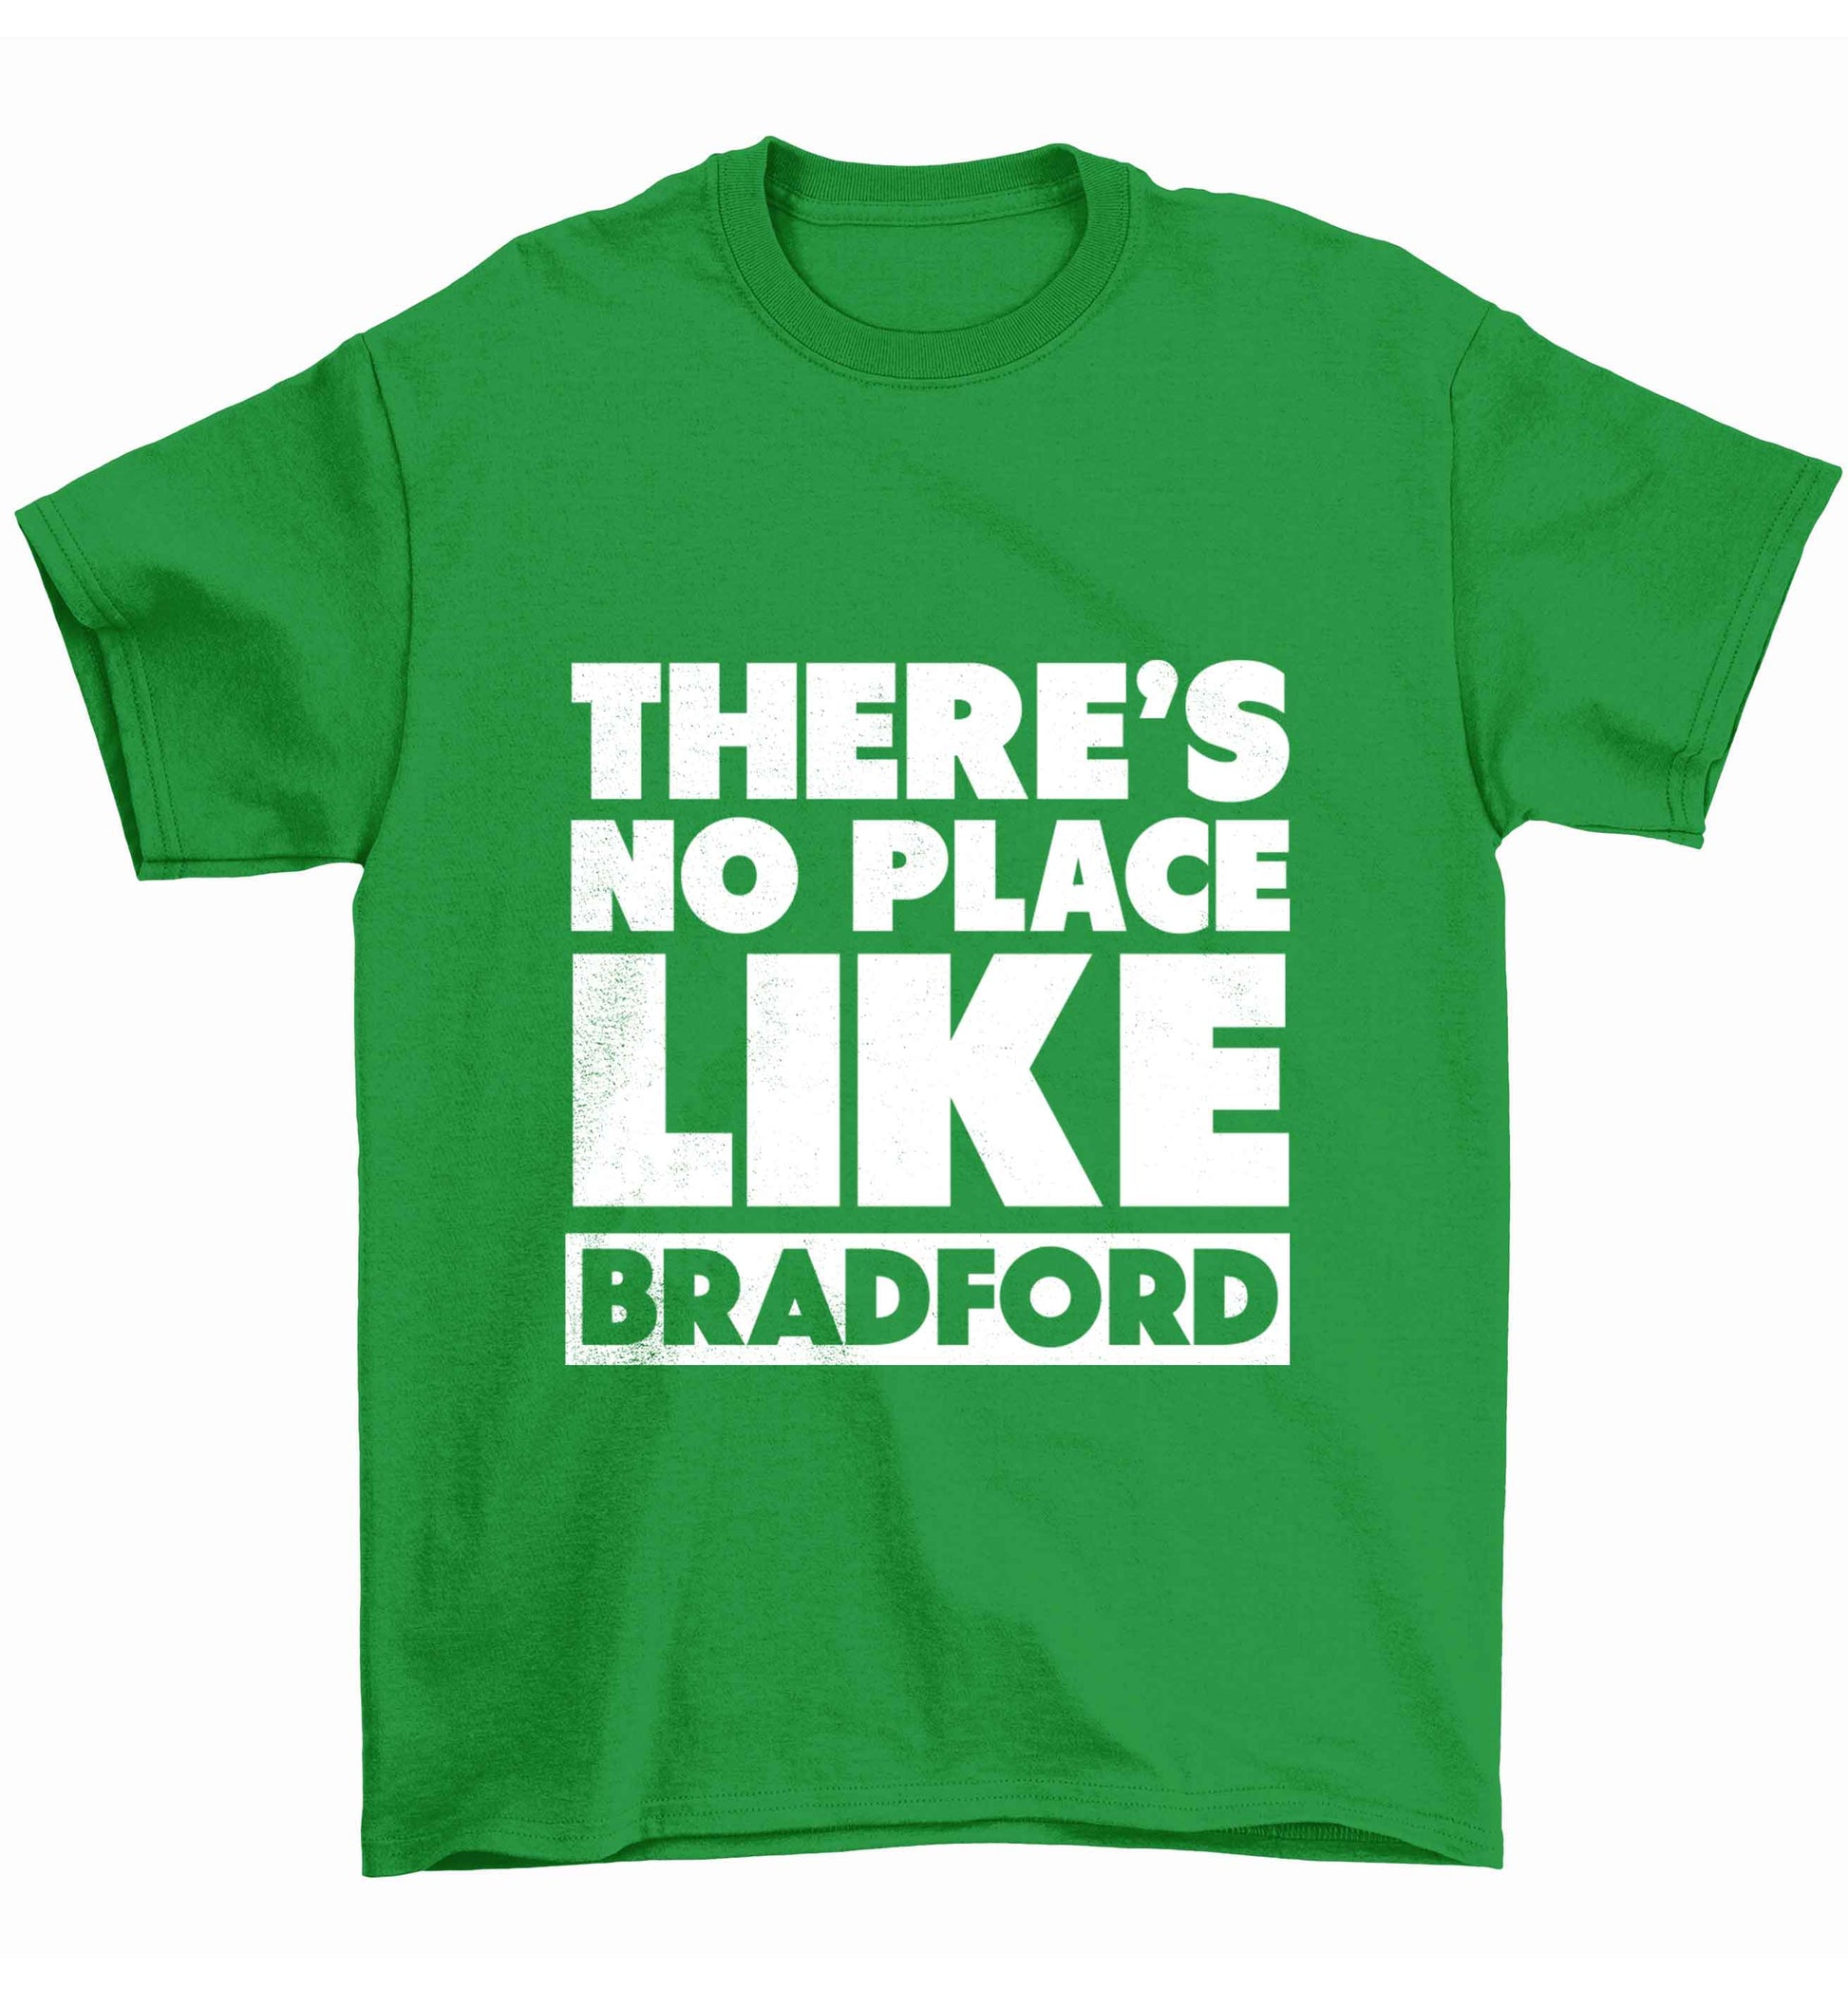 There's no place like Bradford Children's green Tshirt 12-13 Years